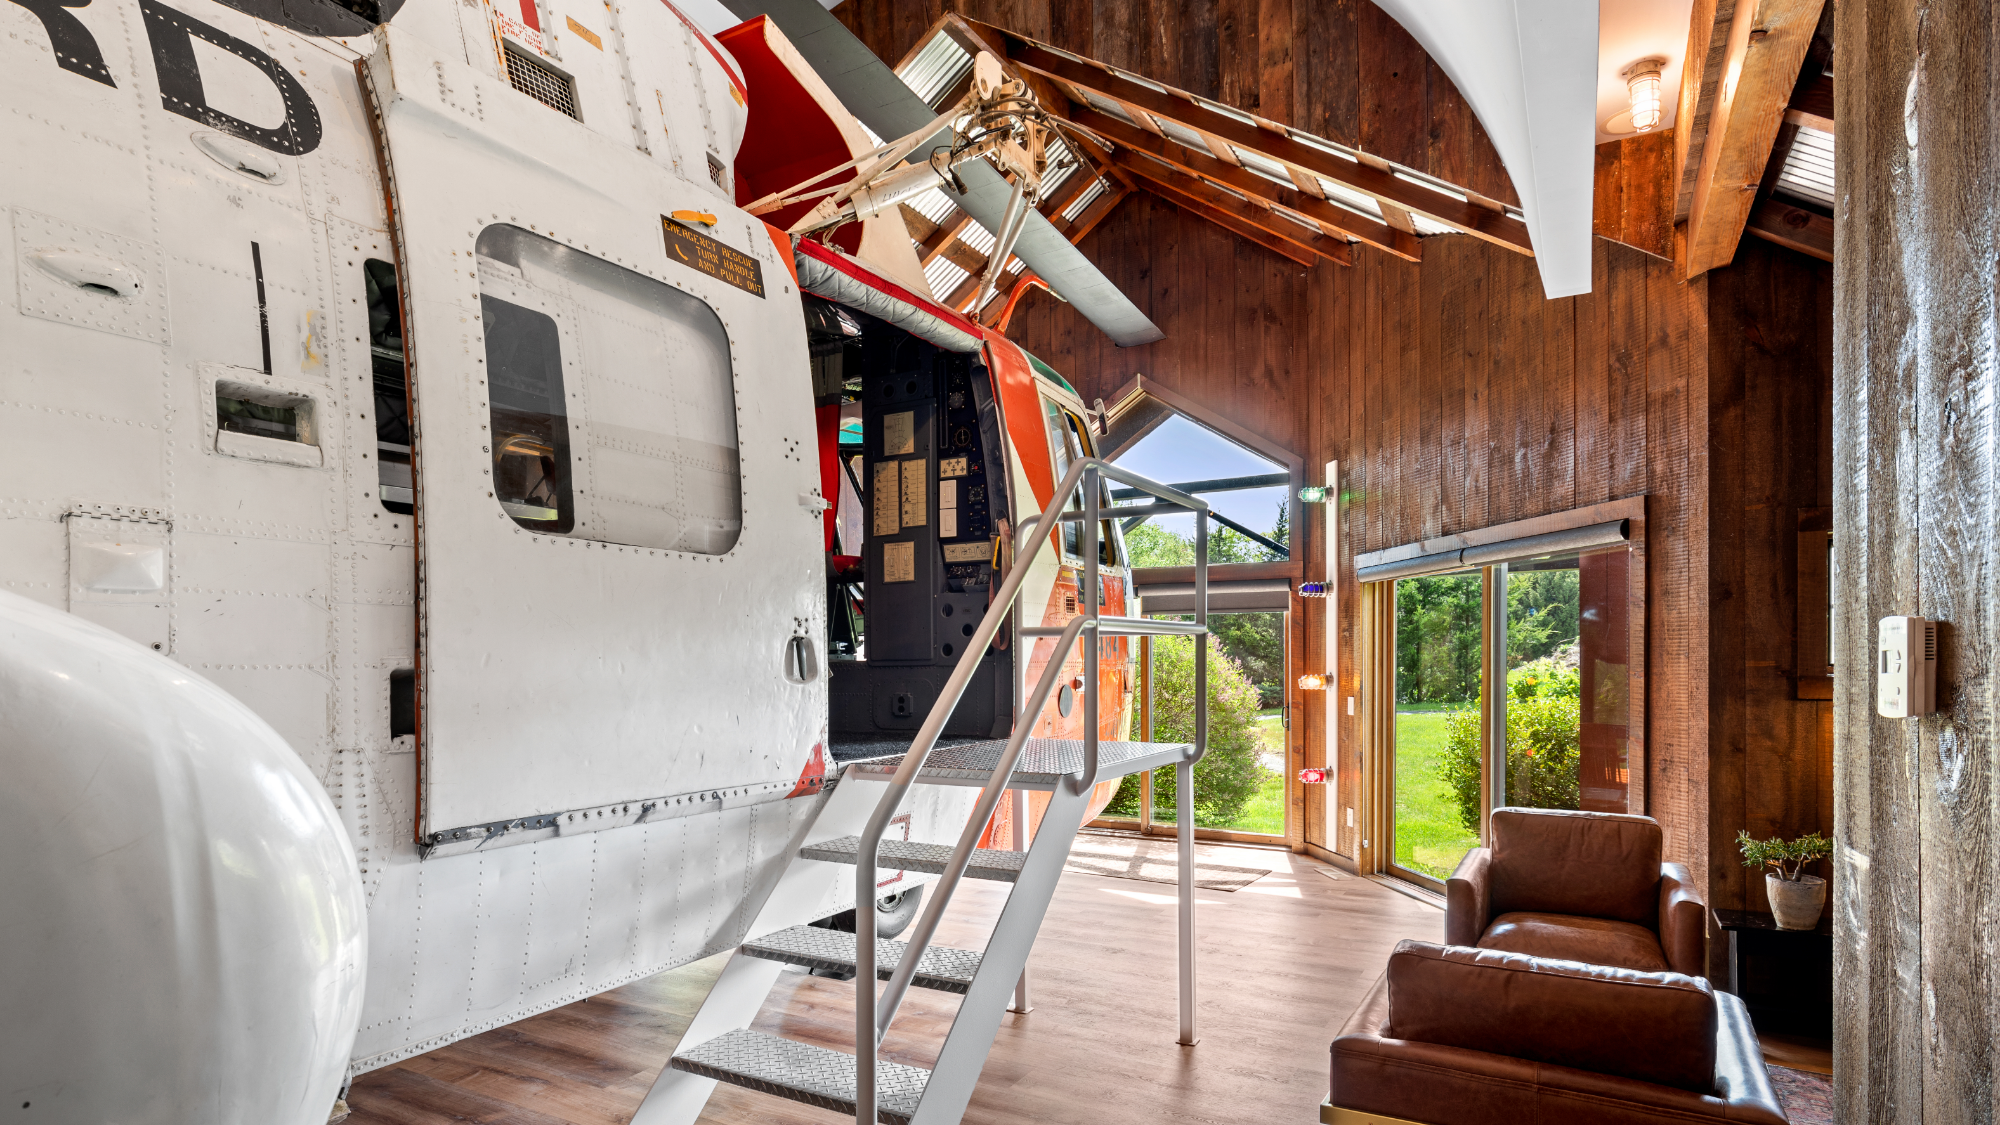 Interior of the Helicopter Cottage at Winvian Farm with an actual helicopter inside.